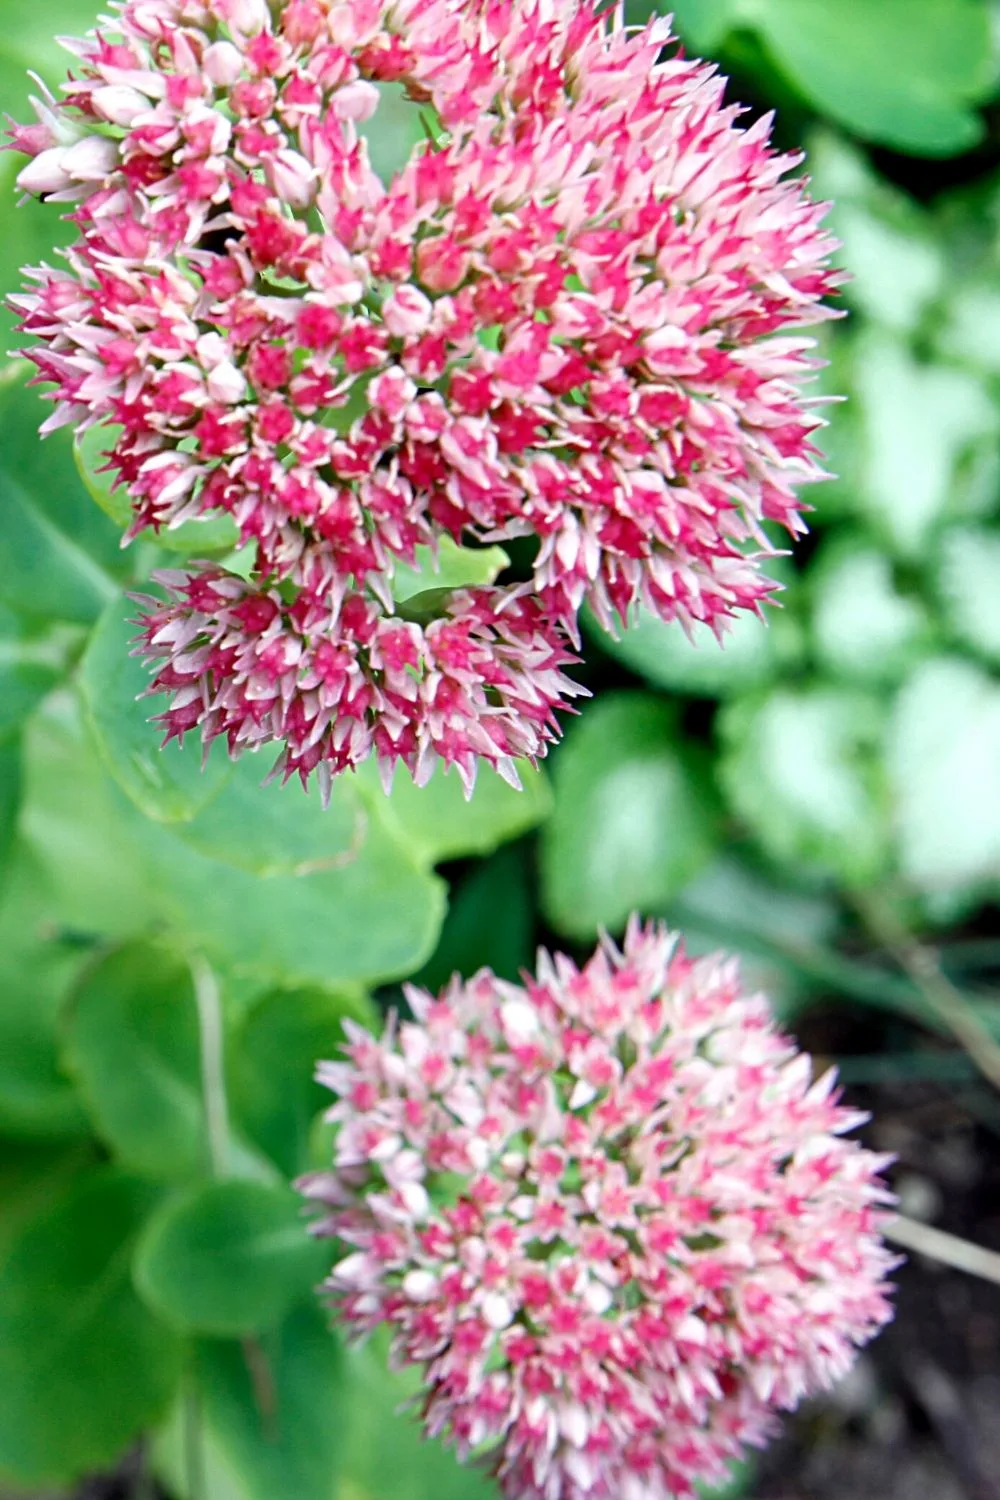 Sedums come in various shapes and designs that thrive best in a southwest facing garden